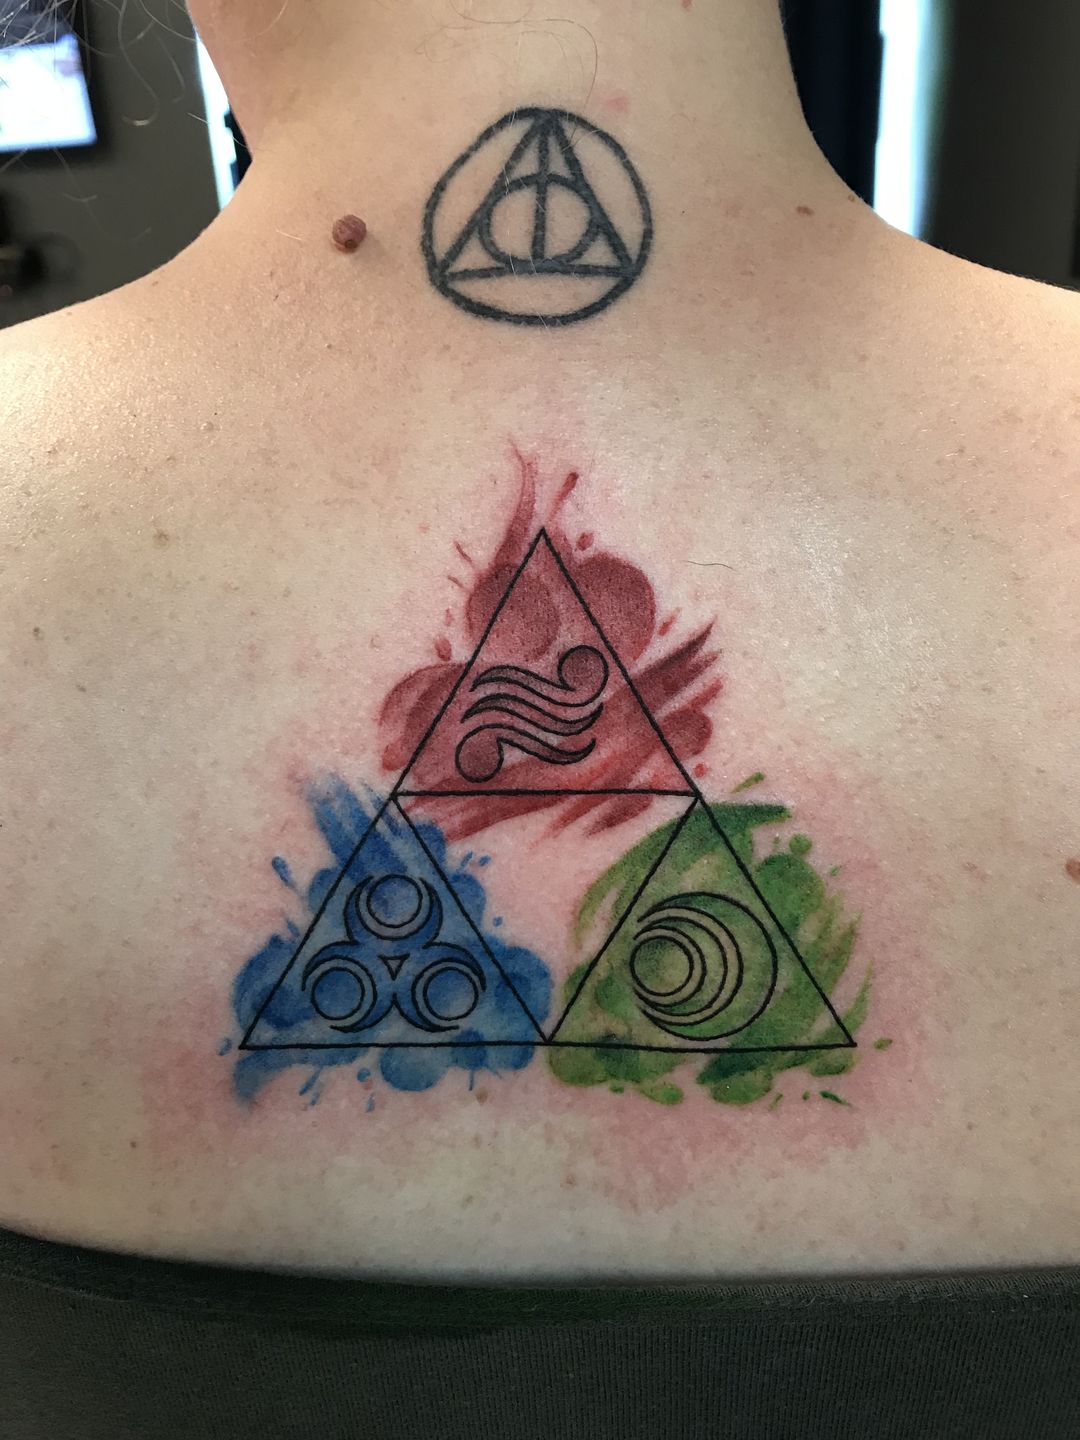 101 Amazing Triforce Tattoo Designs You Need To See! | Outsons | Men's  Fashion Tips And Style Guide For 2020 | Zelda tattoo, Tattoo designs,  Tattoos